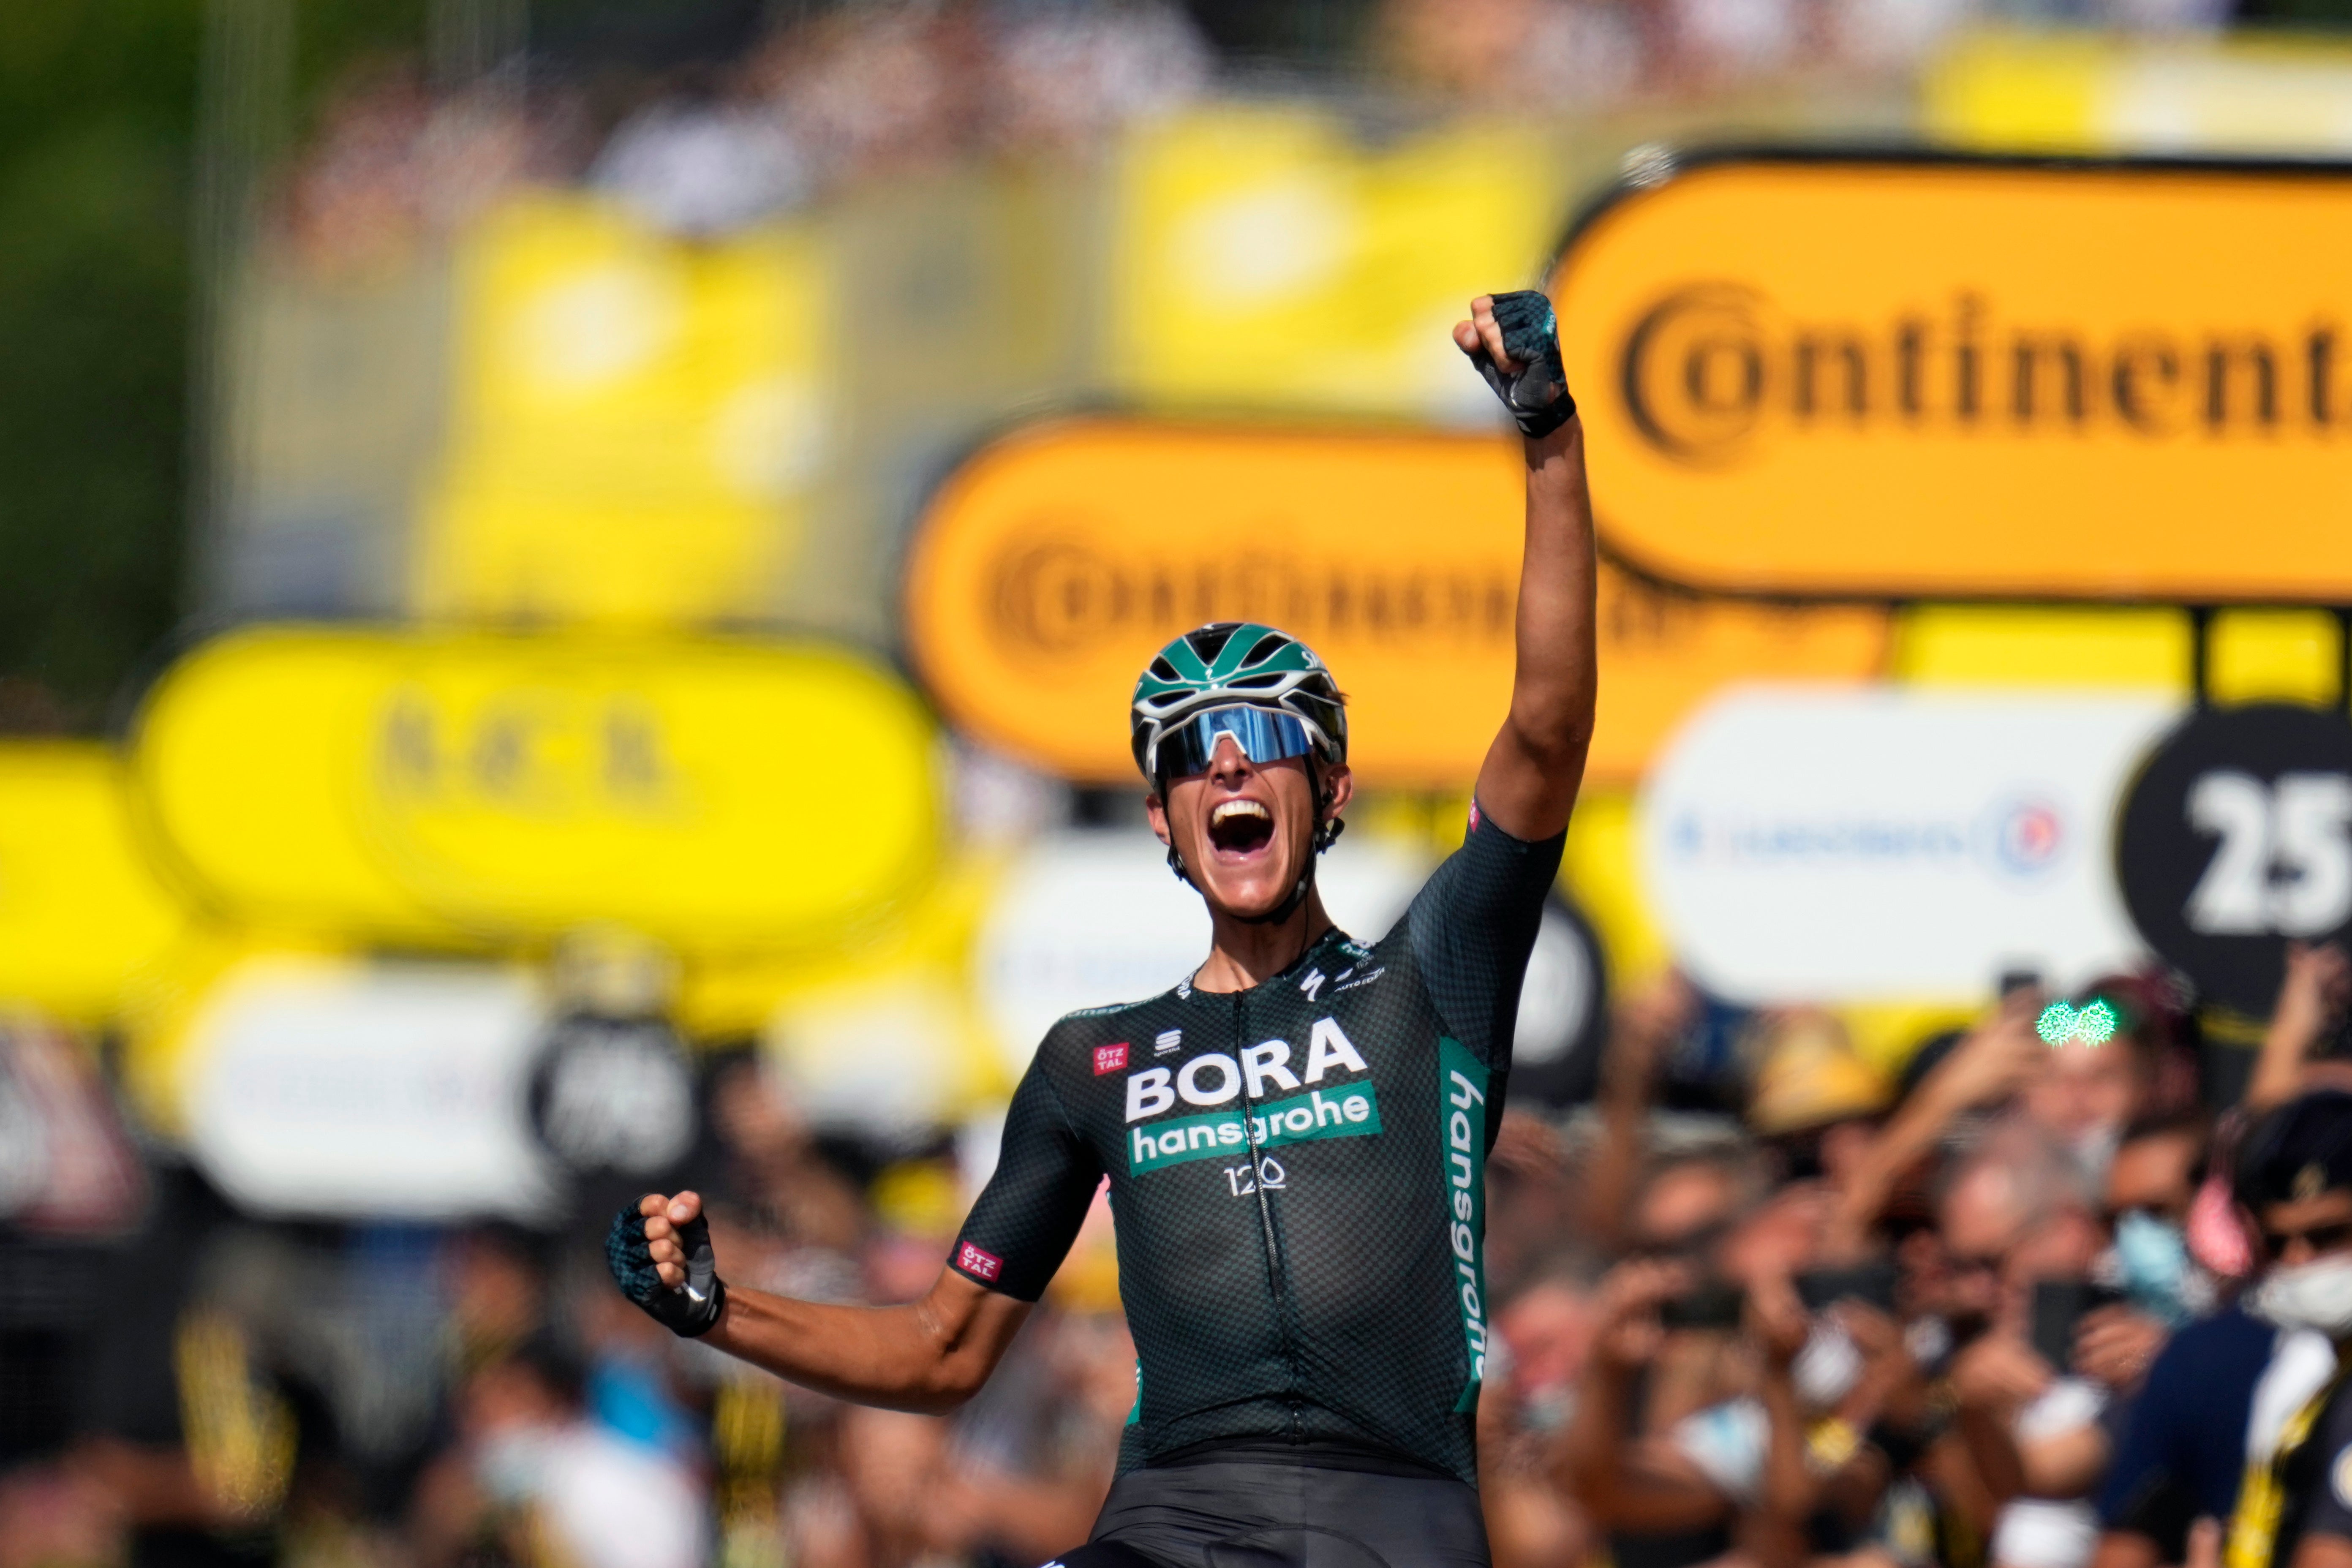 Nils Politt took victory from a breakaway on stage 12 of the Tour de France